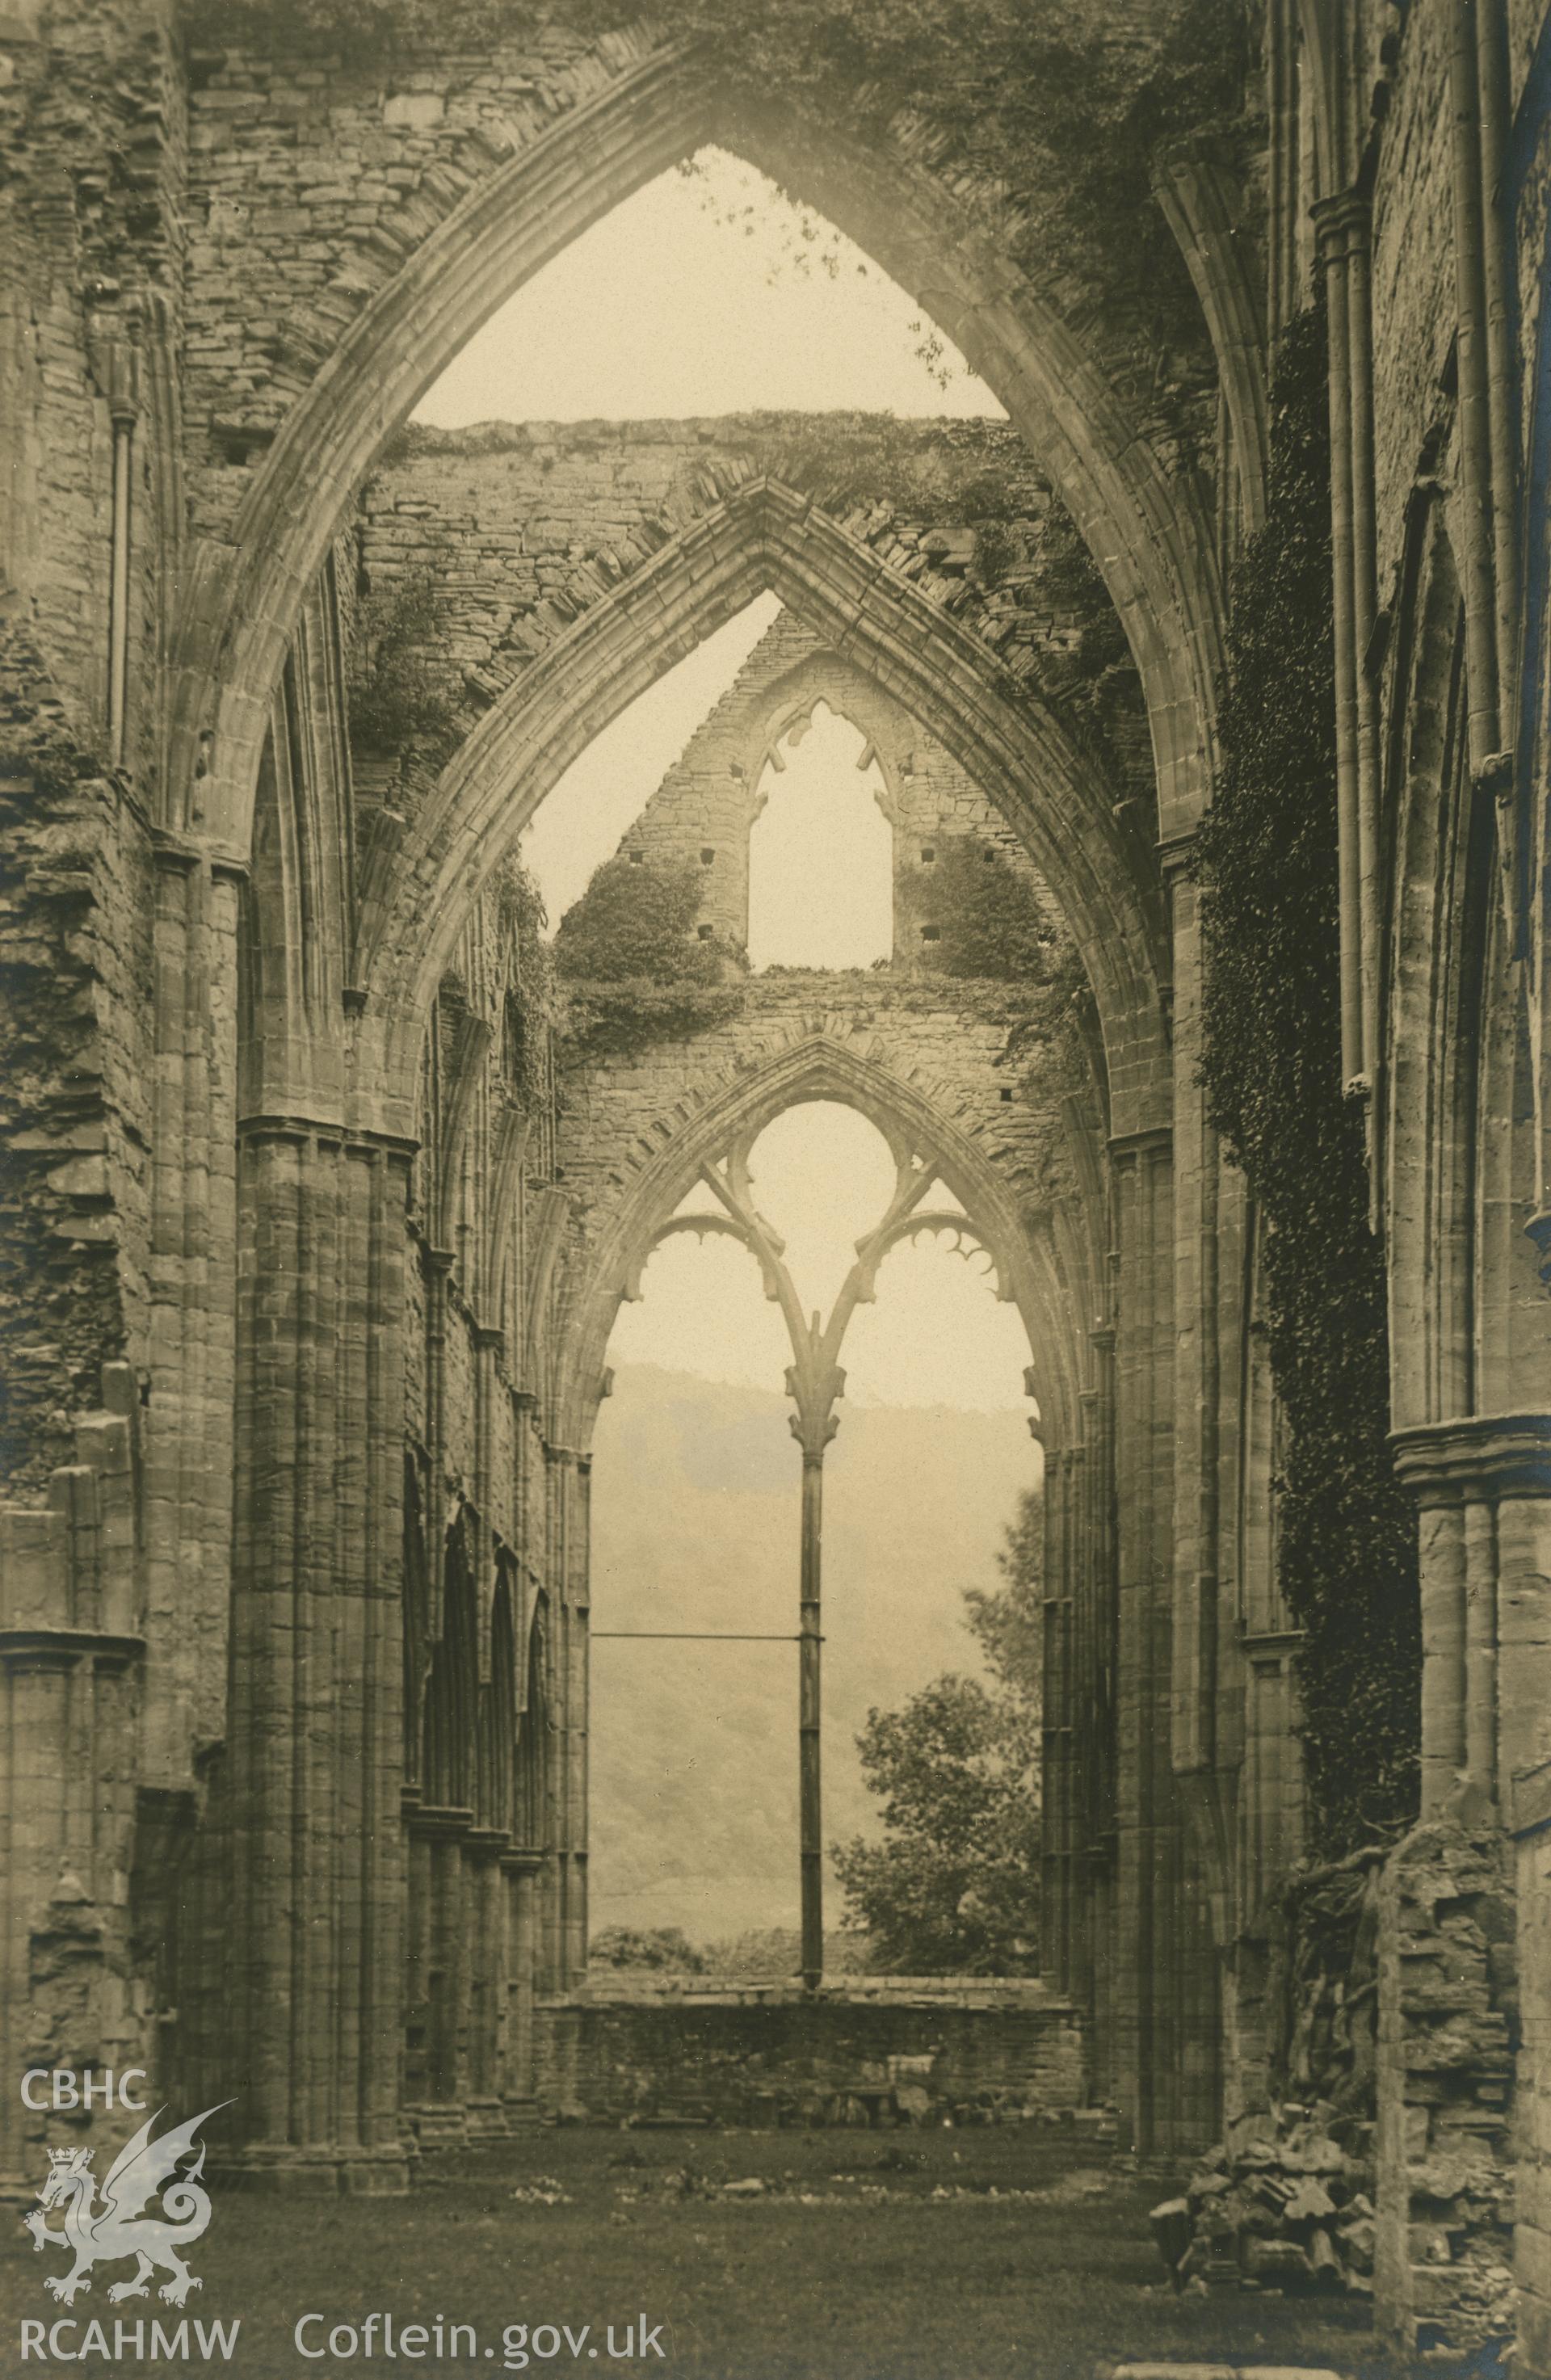 Digital copy of an interior view of Tintern Abbey looking east.